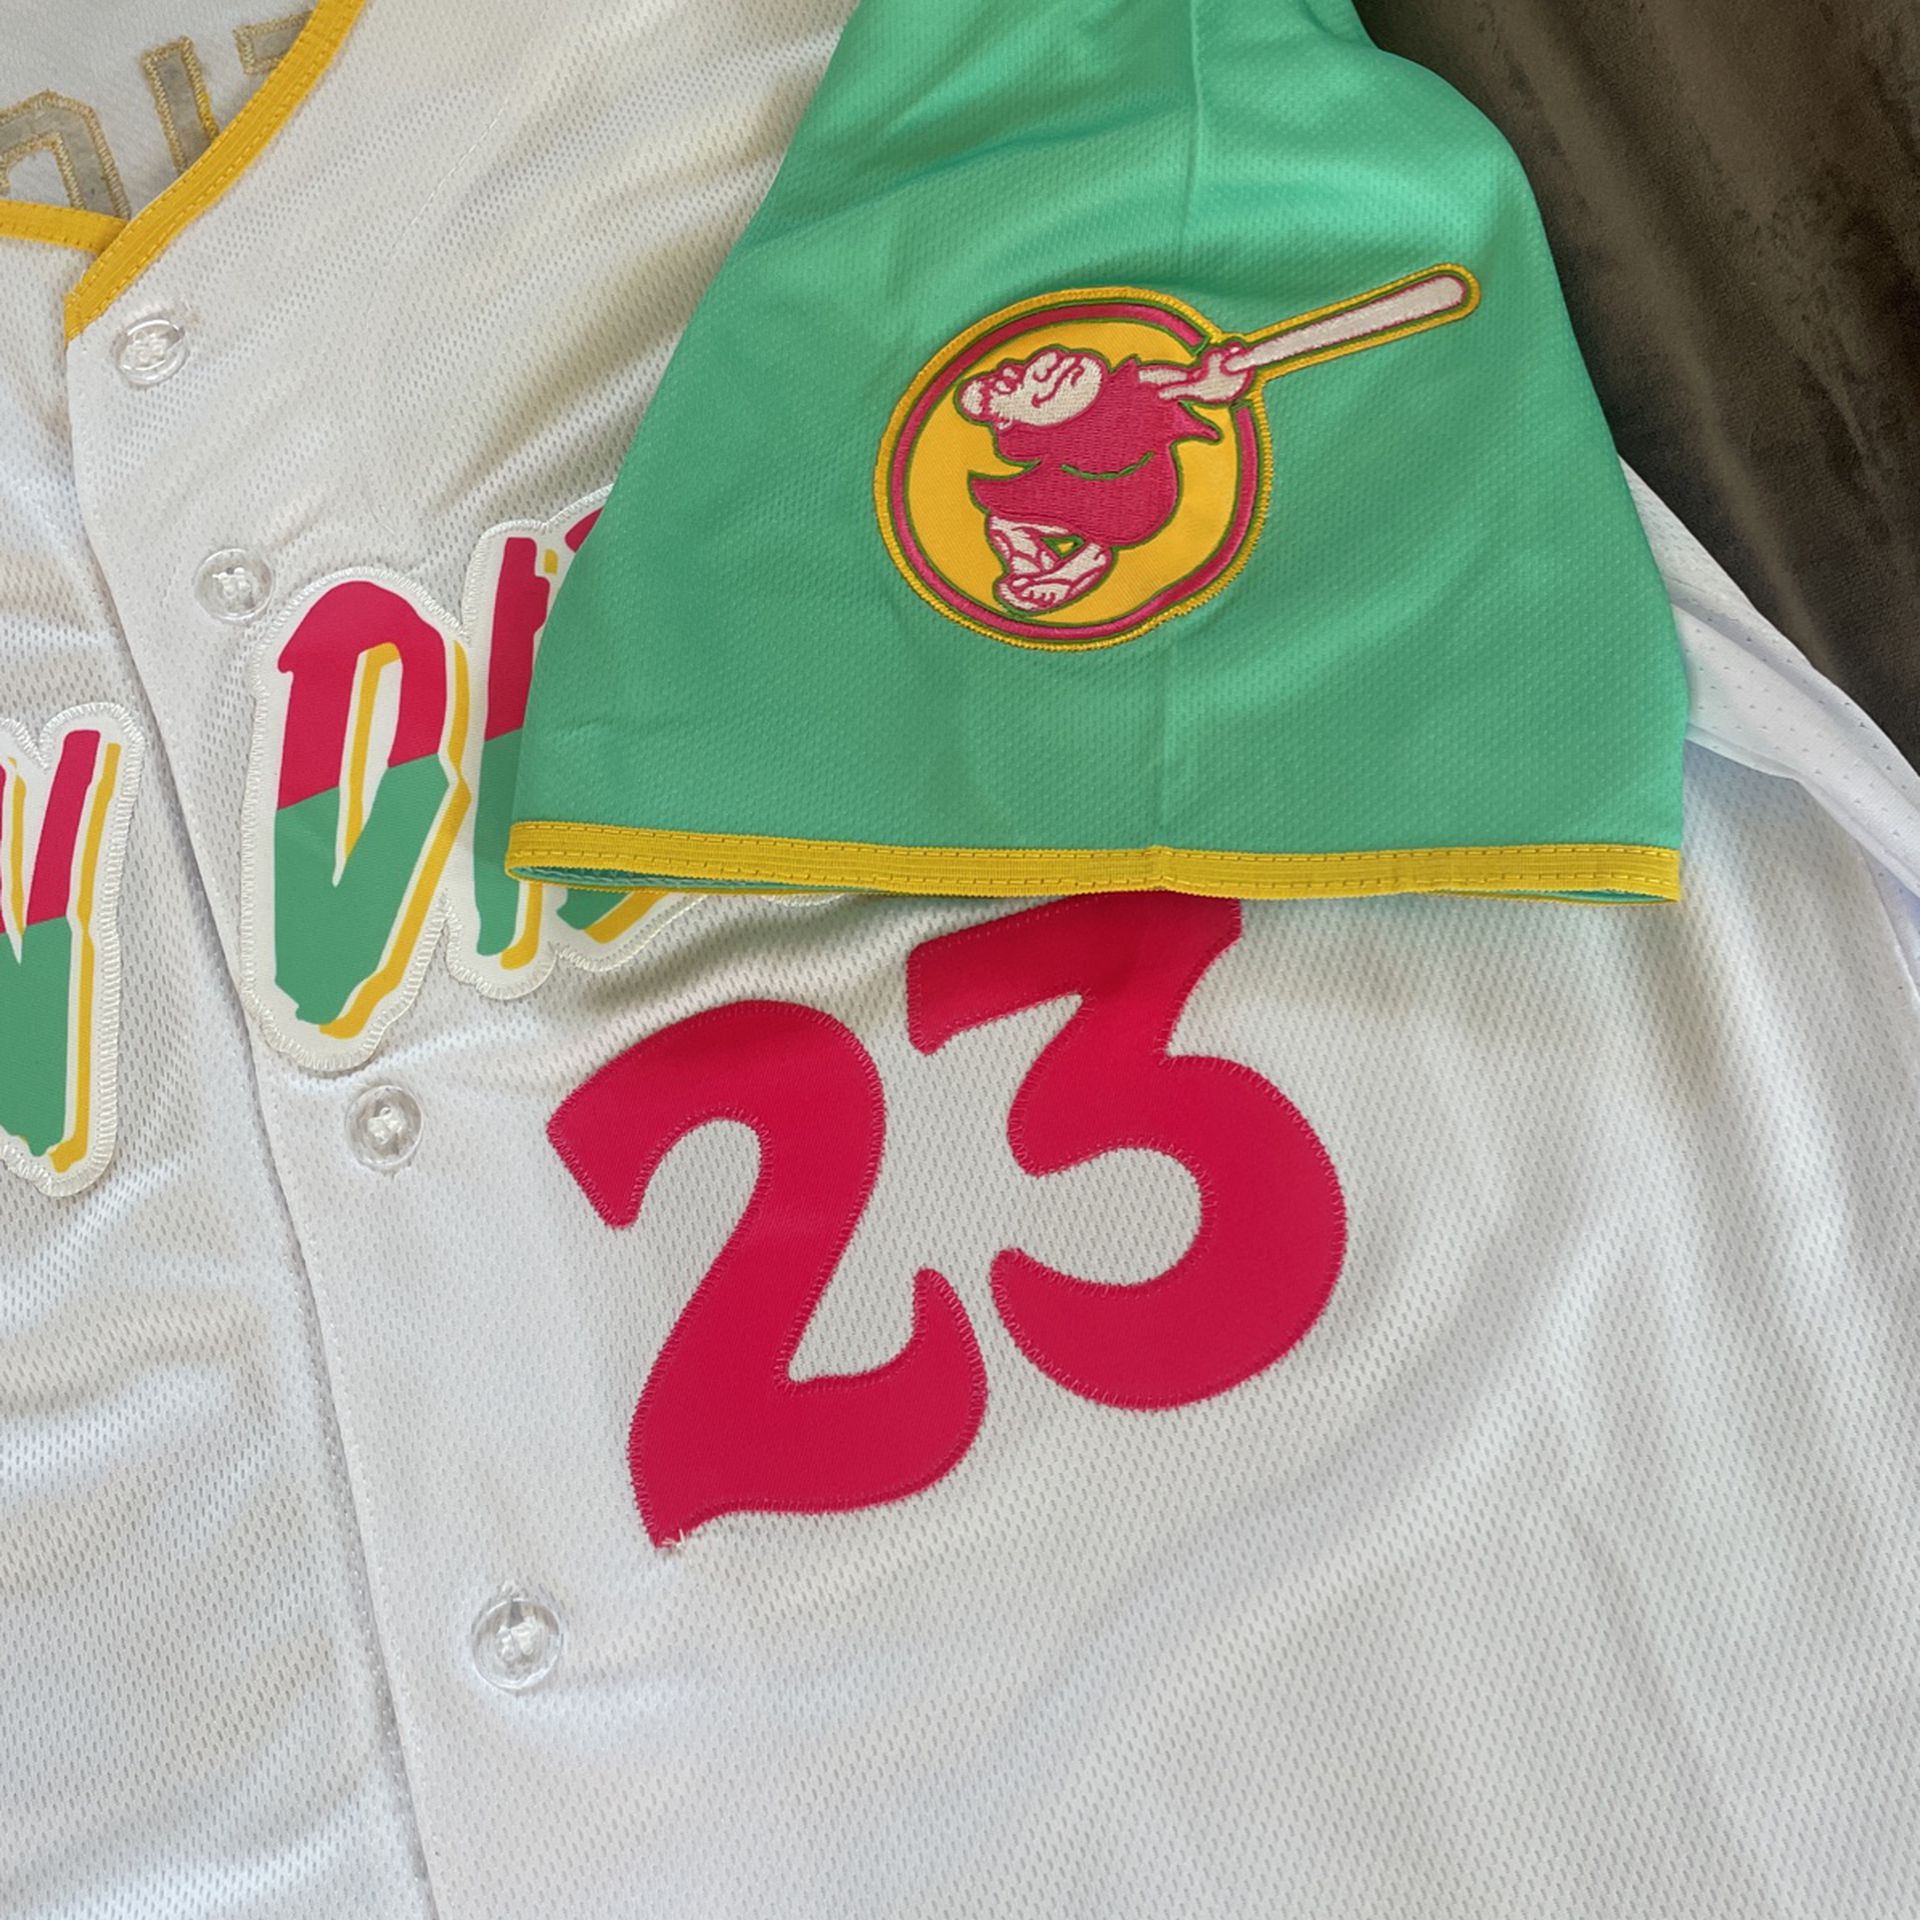 San Diego Padres City Connect Baseball Jerseys for Sale in Lemon Grove, CA  - OfferUp